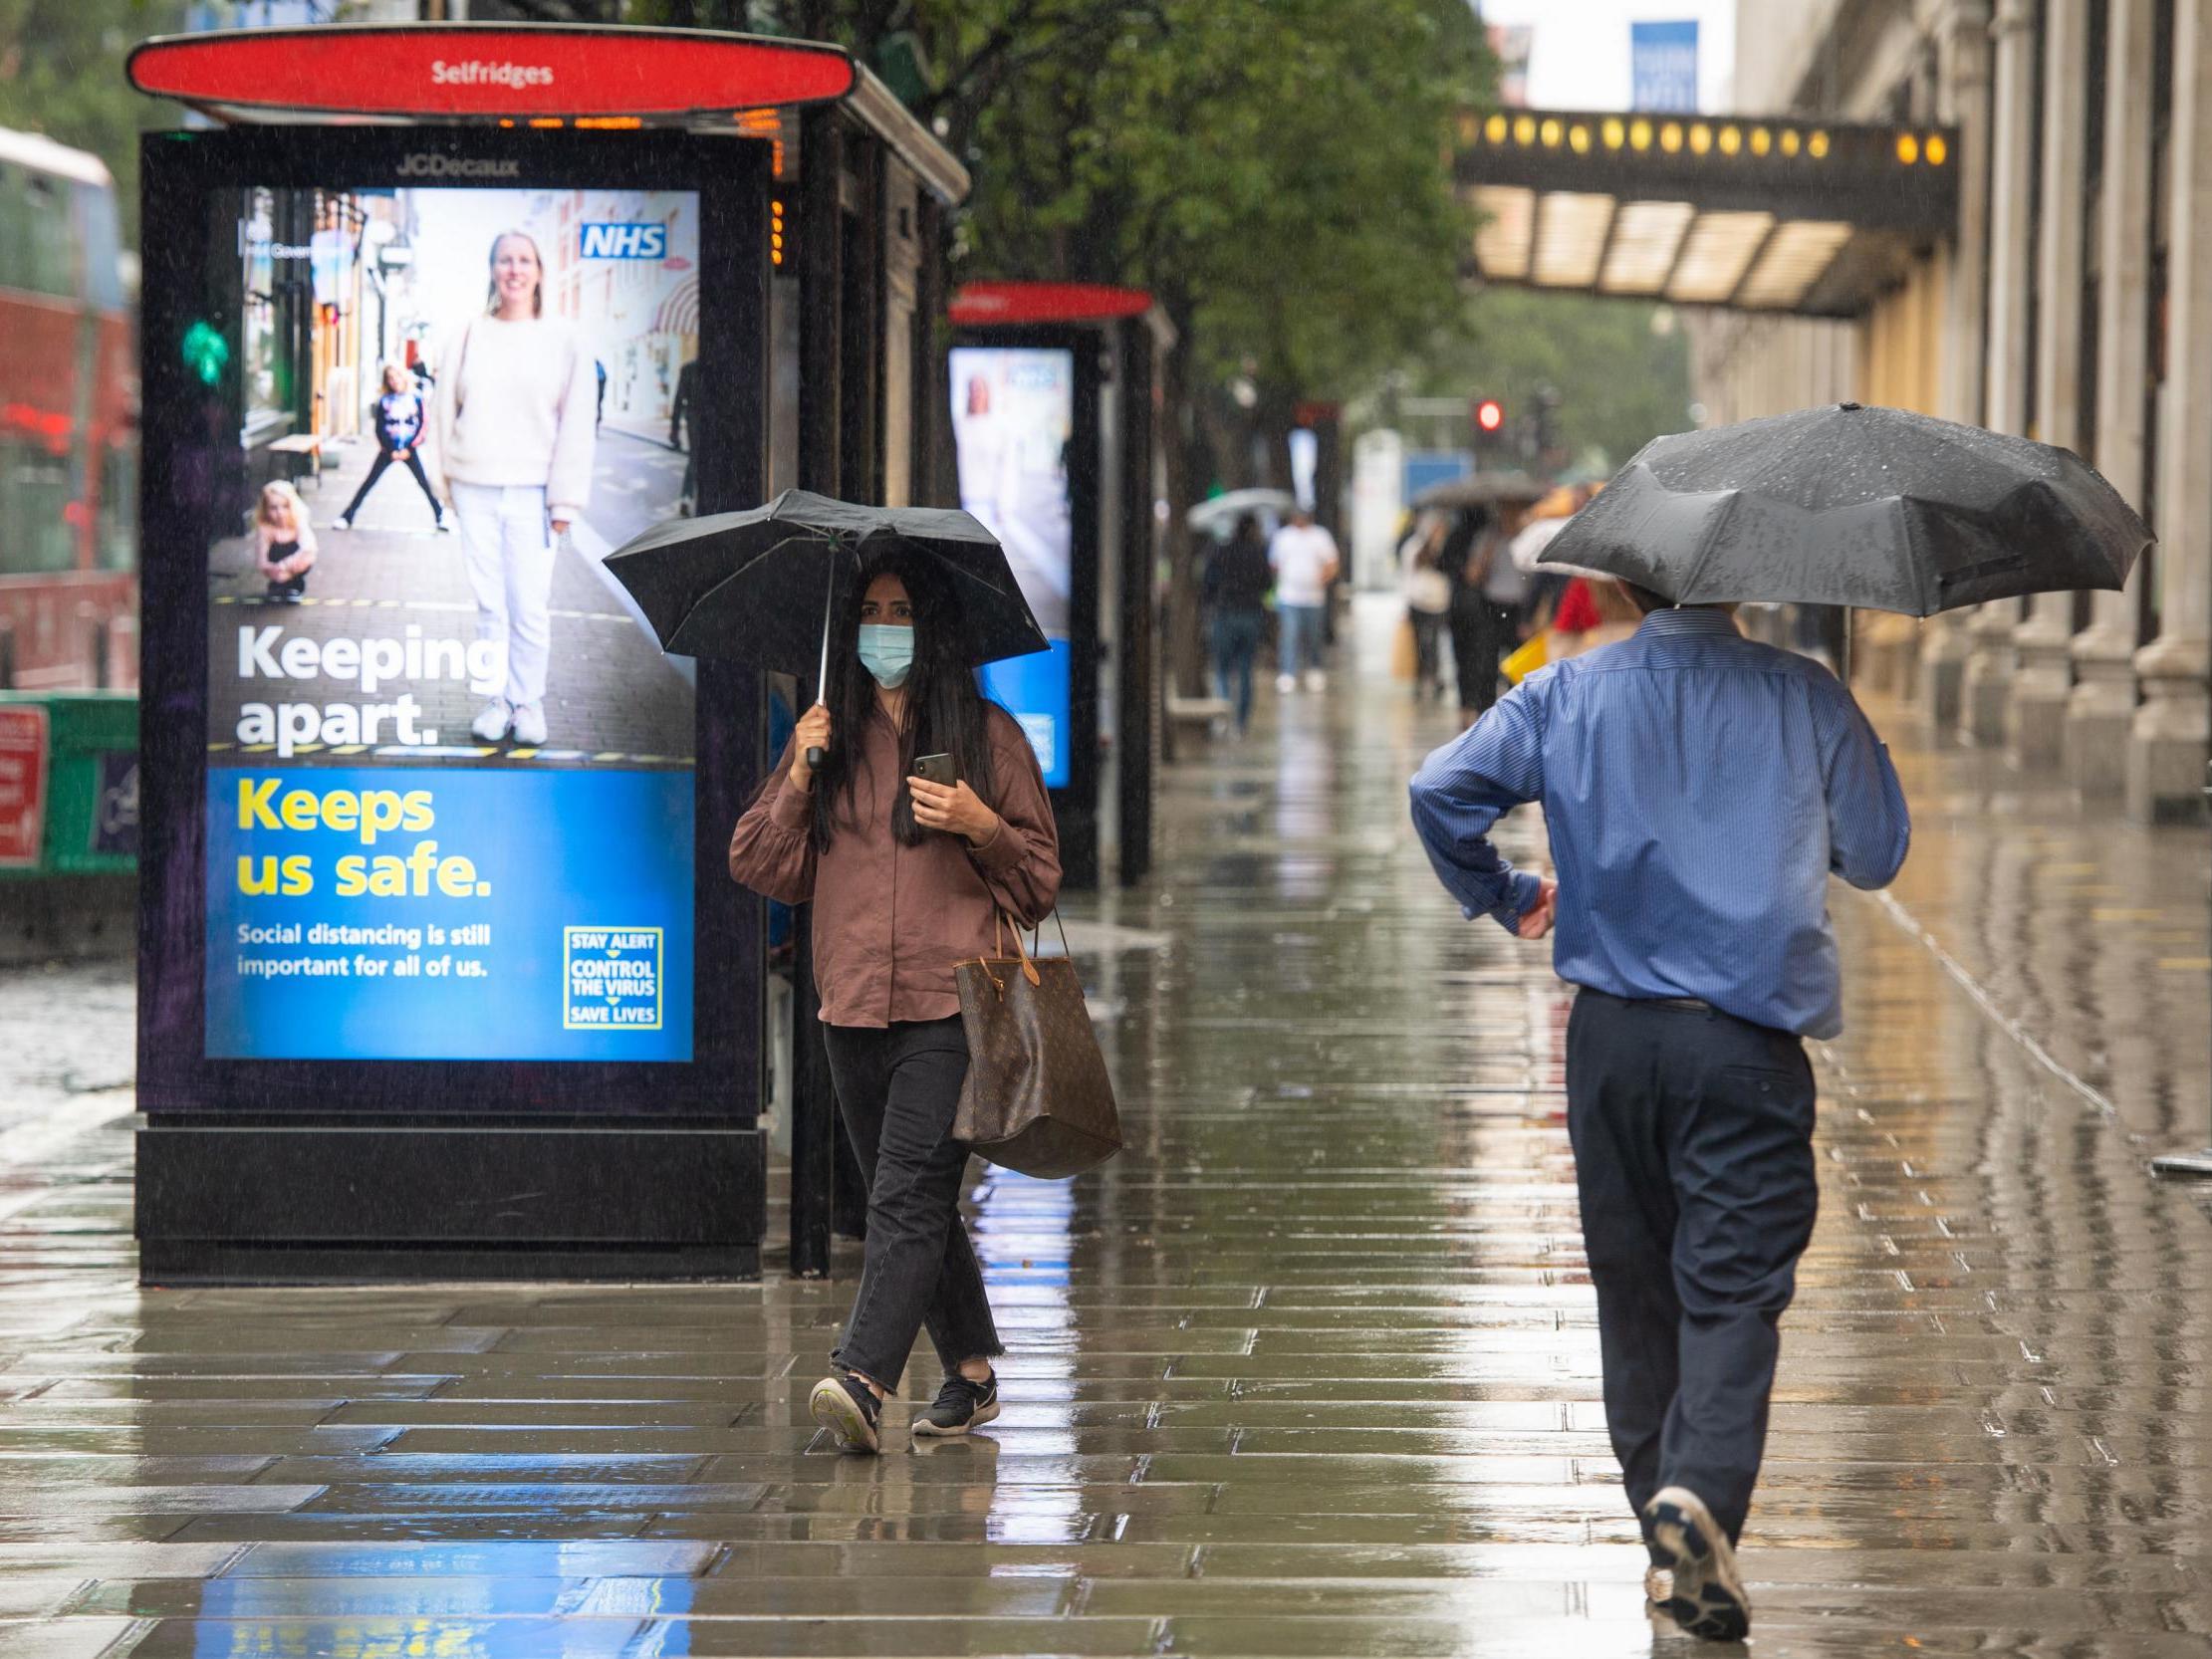 A shopper passes a social distancing sign on Oxford Street, London, as further coronavirus lockdown restrictions are lifted in England